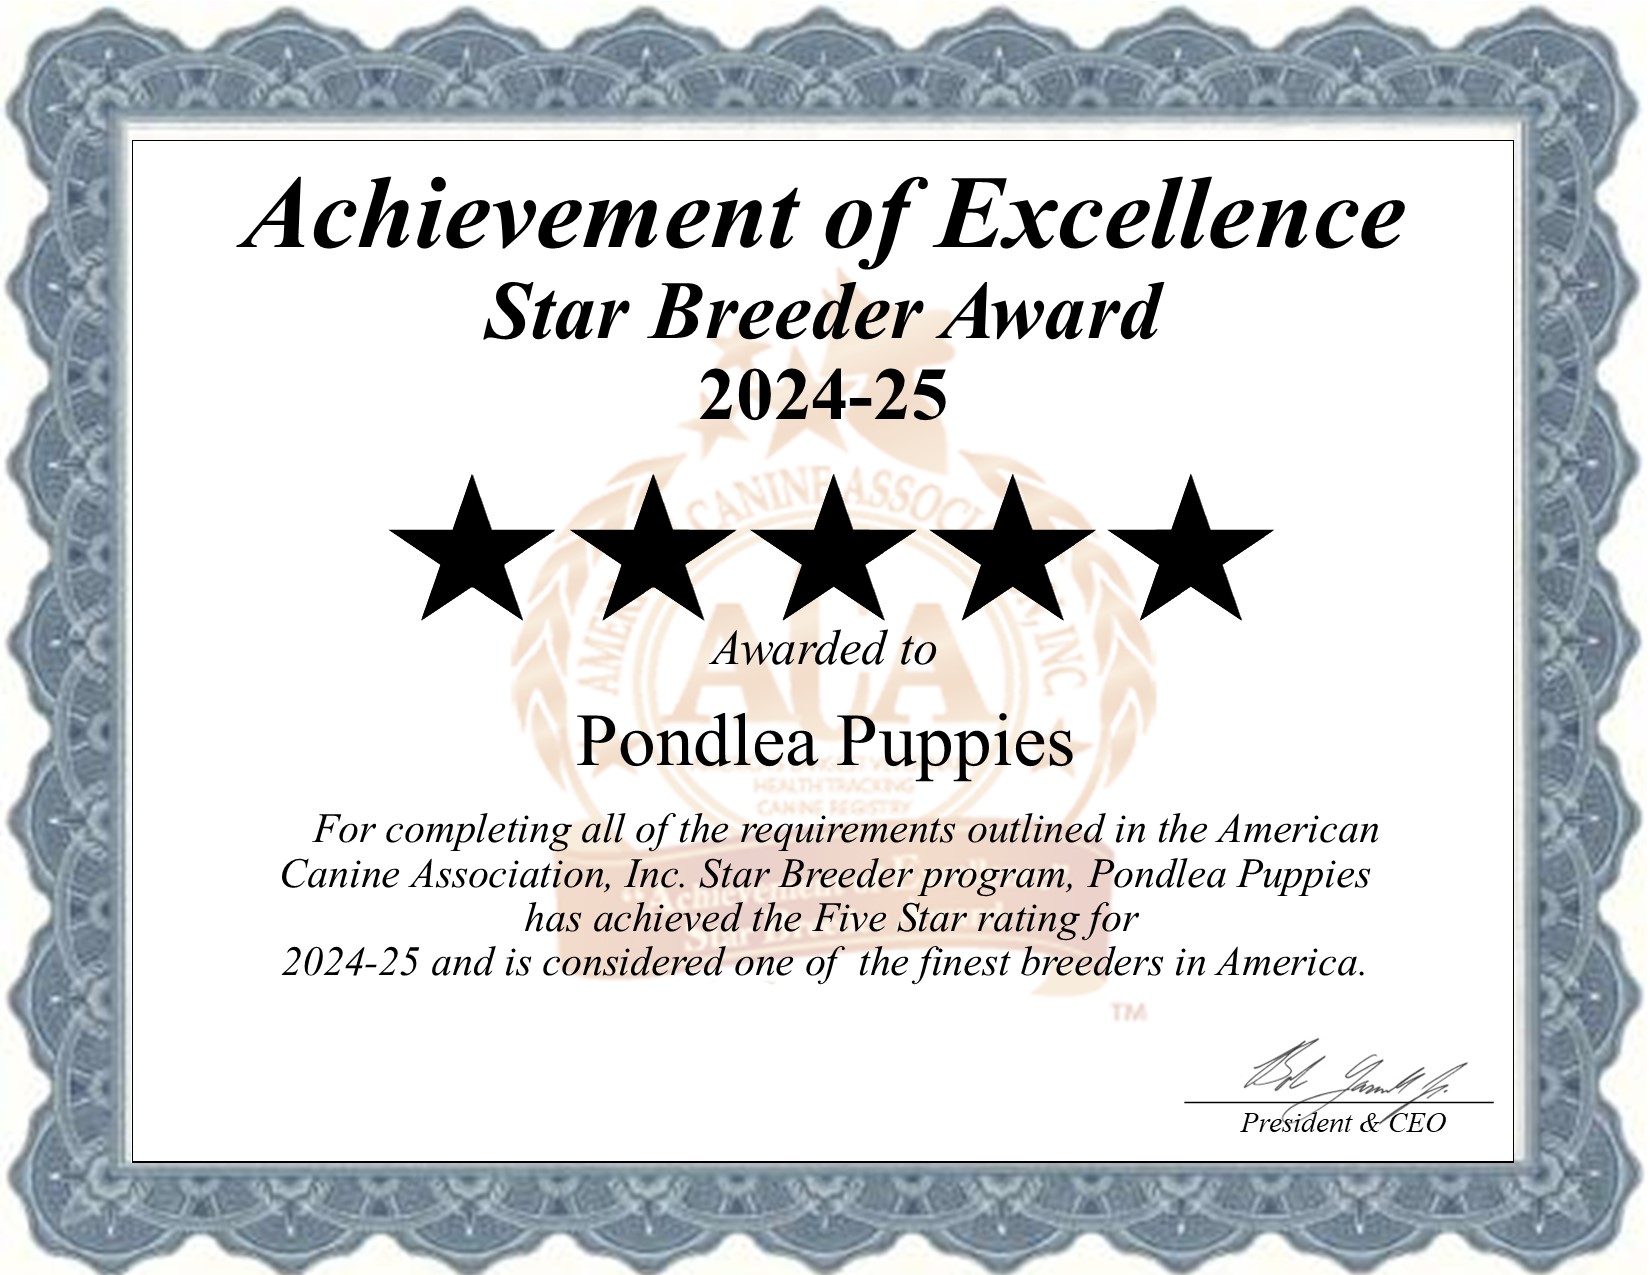 Pondlea, Puppies, dog, breeder, star, certificate, Pondlea-Puppies, New Holland, PA, Pennsylvania, puppy, dog, kennels, mill, puppymill, usda, 5-star, aca, ica, registered, Yorkie-Poo, 23-A-0679